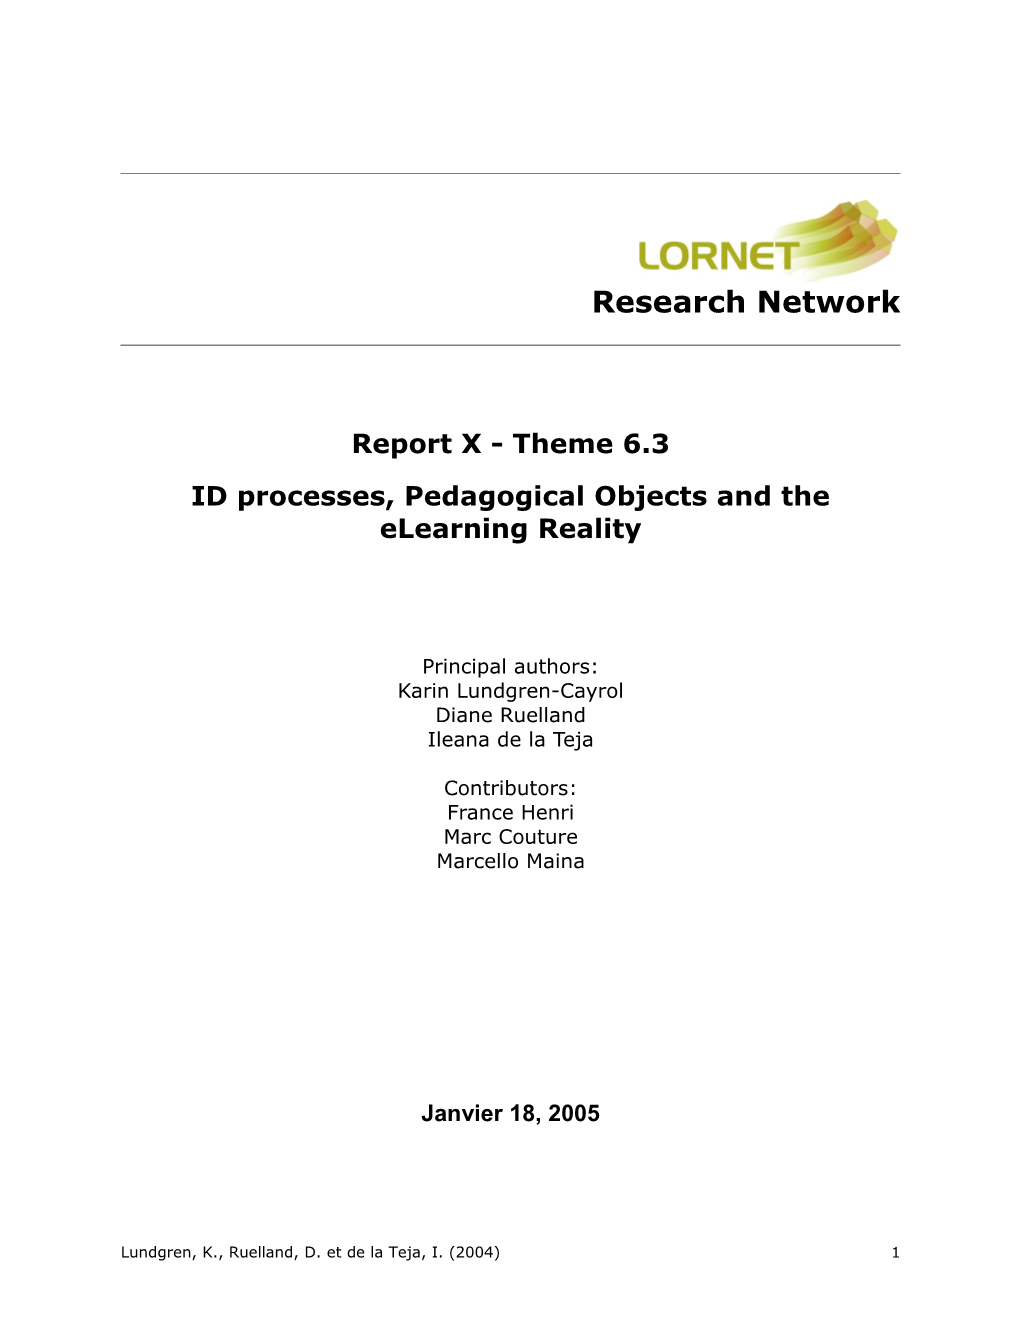 ID Processes, Pedagogical Objects and the Elearning Reality